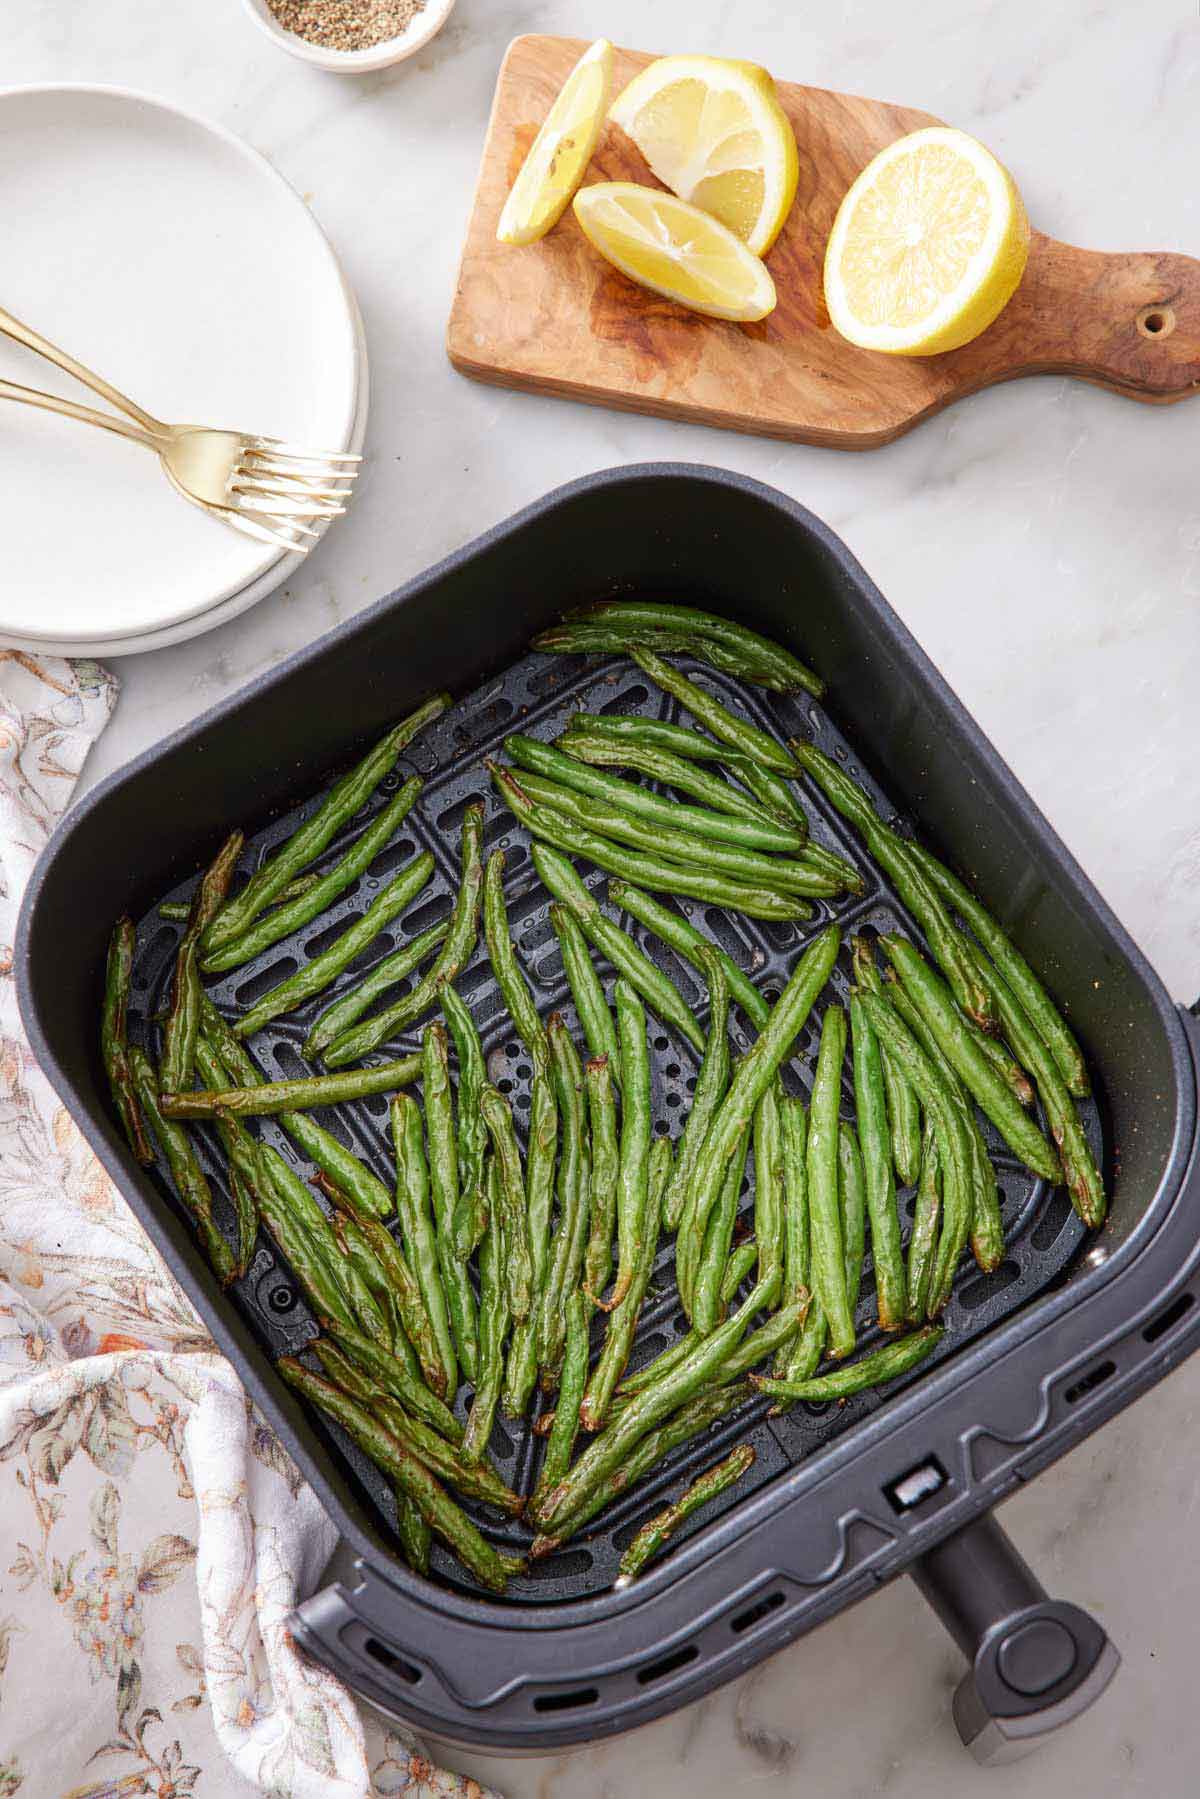 An overhead photo of green beans in an air fryer basket. A cut lemon off to the side along with a stack of plates and forks.